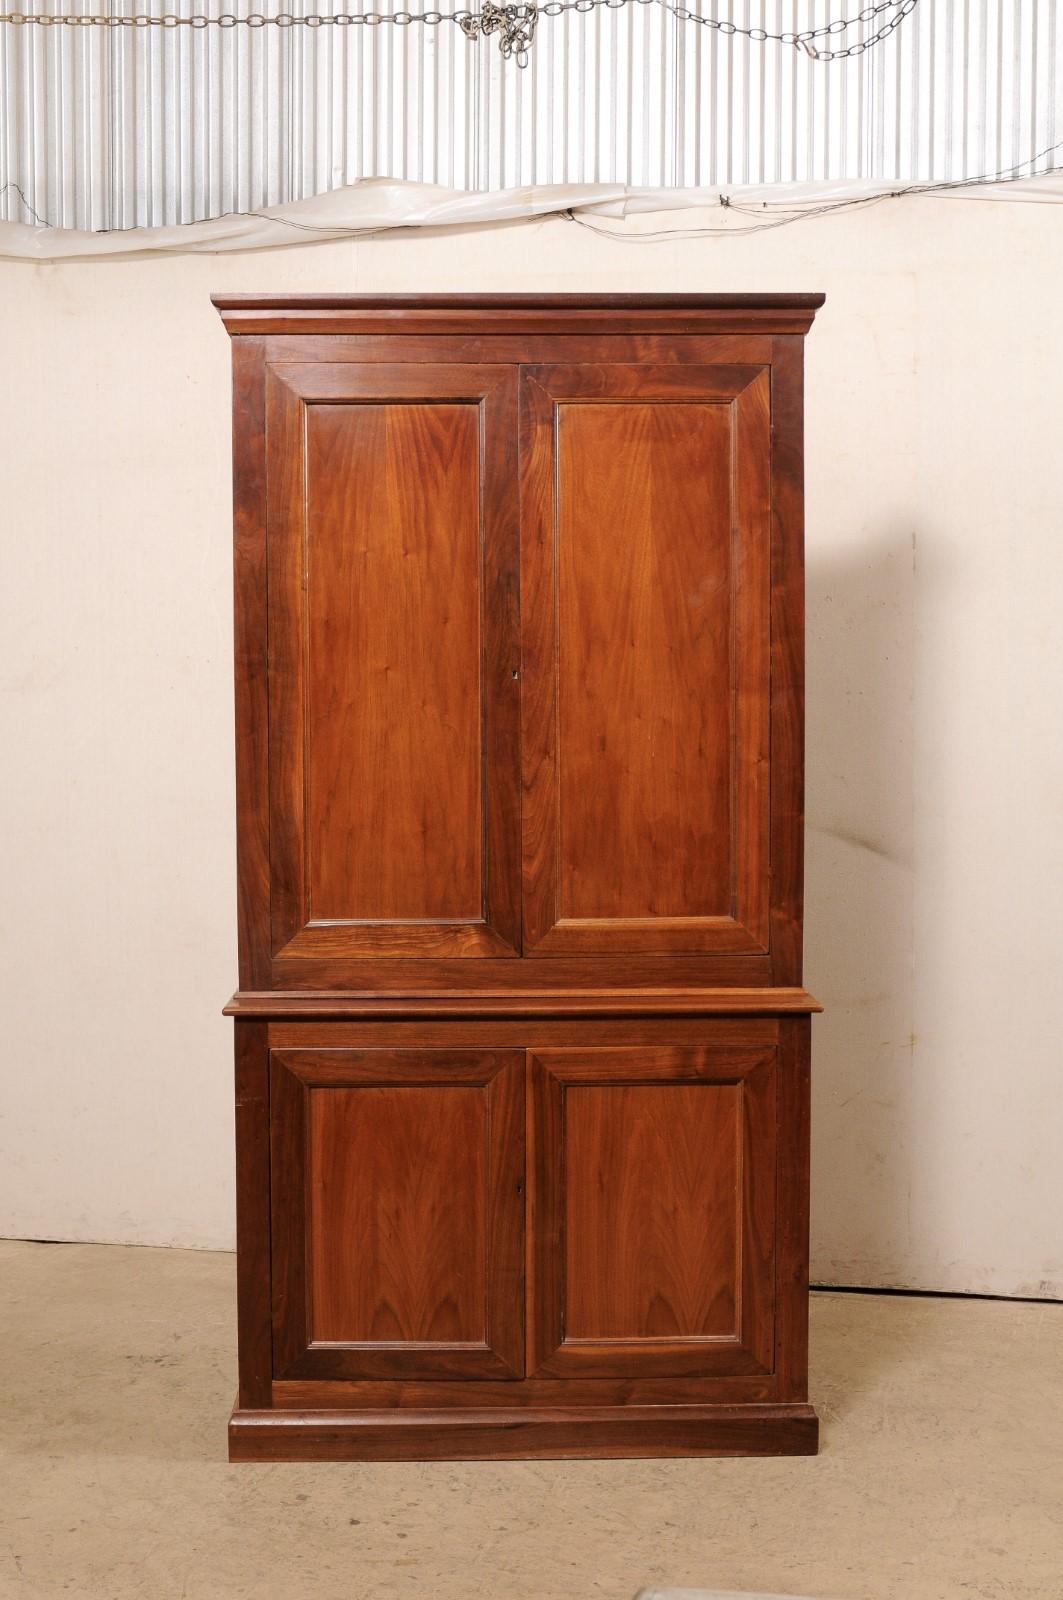 A French tall cabinet of cherry wood, designed in clean, linear lines, from the mid 20th century. This mid-century cabinet from France stands just over 7.5 feet in height and has a more slender depth, of only 15